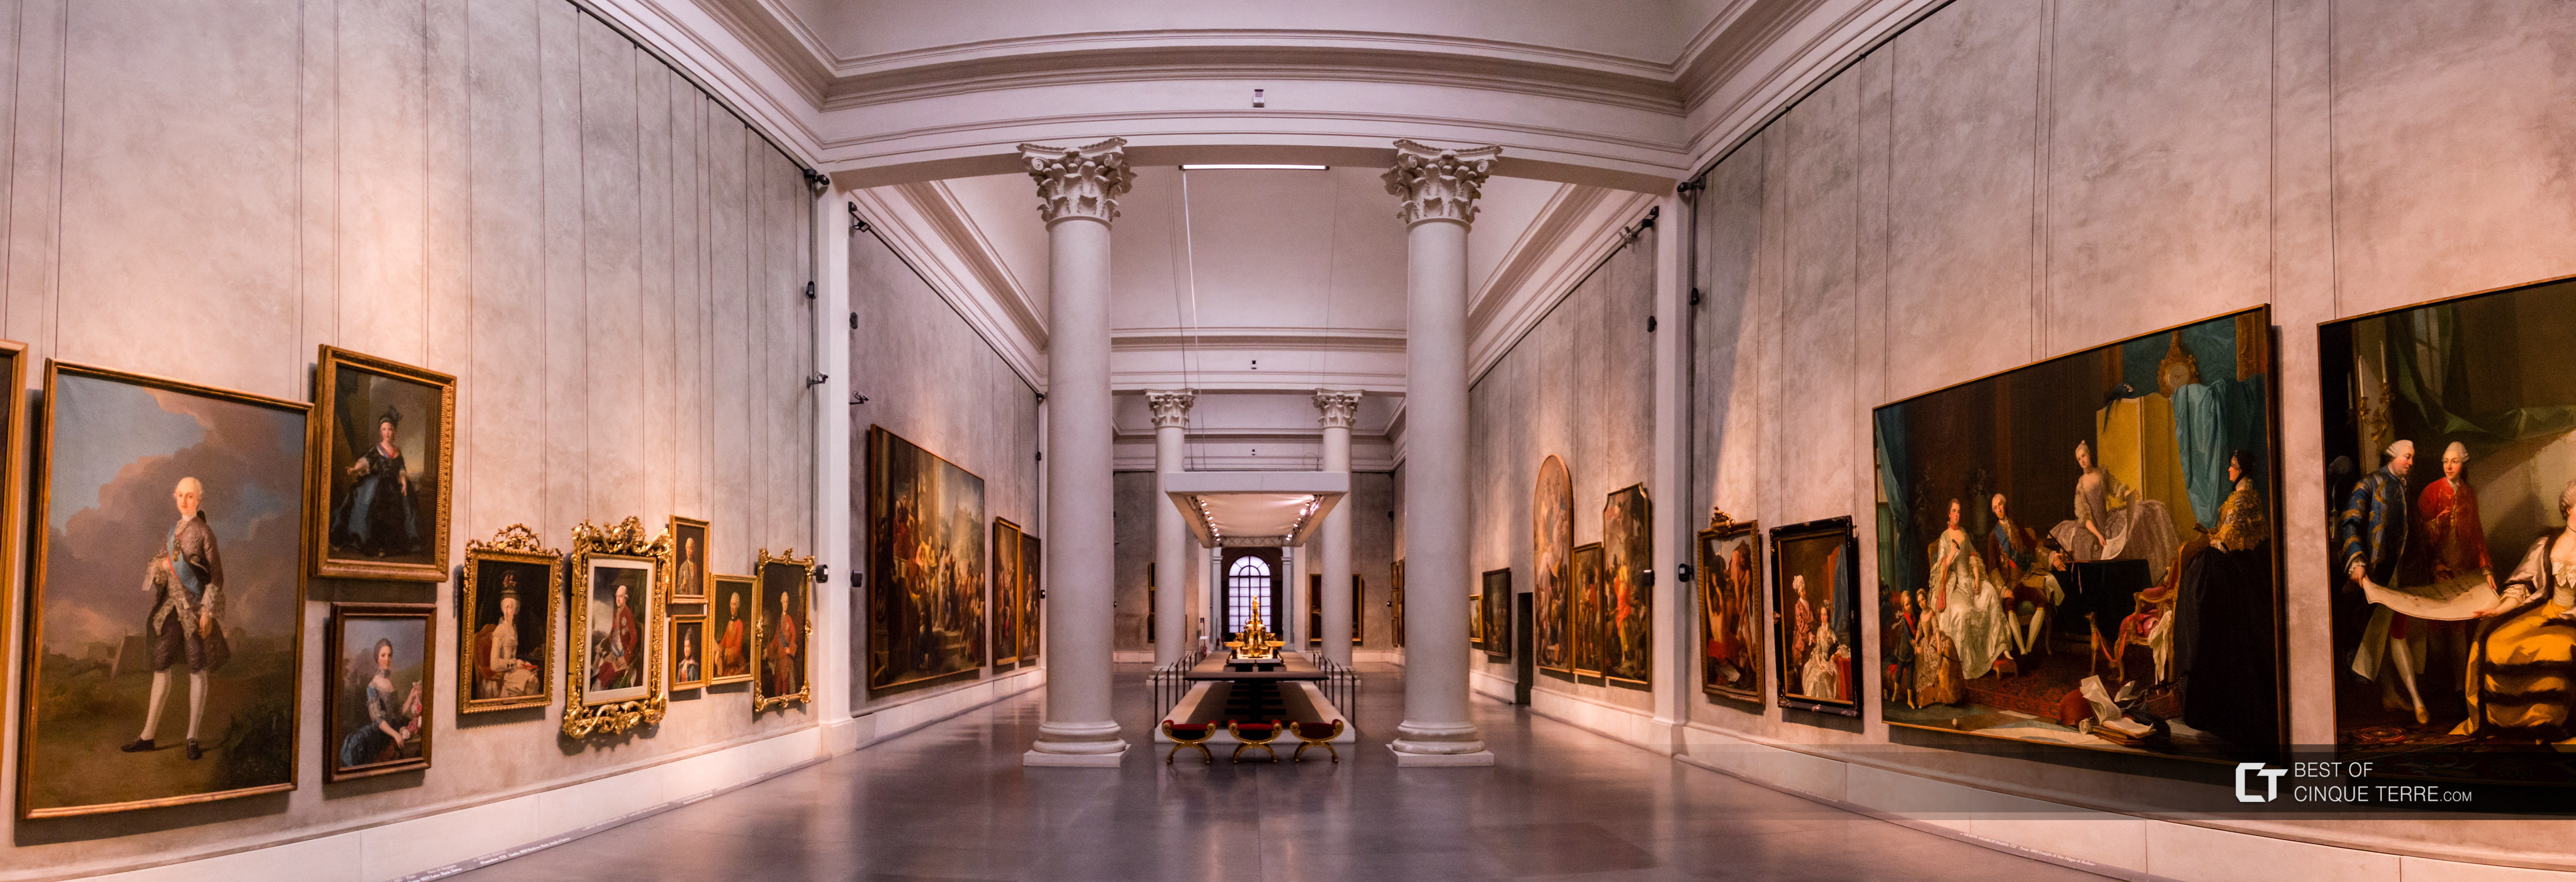 National Art Gallery, Parma, Italy